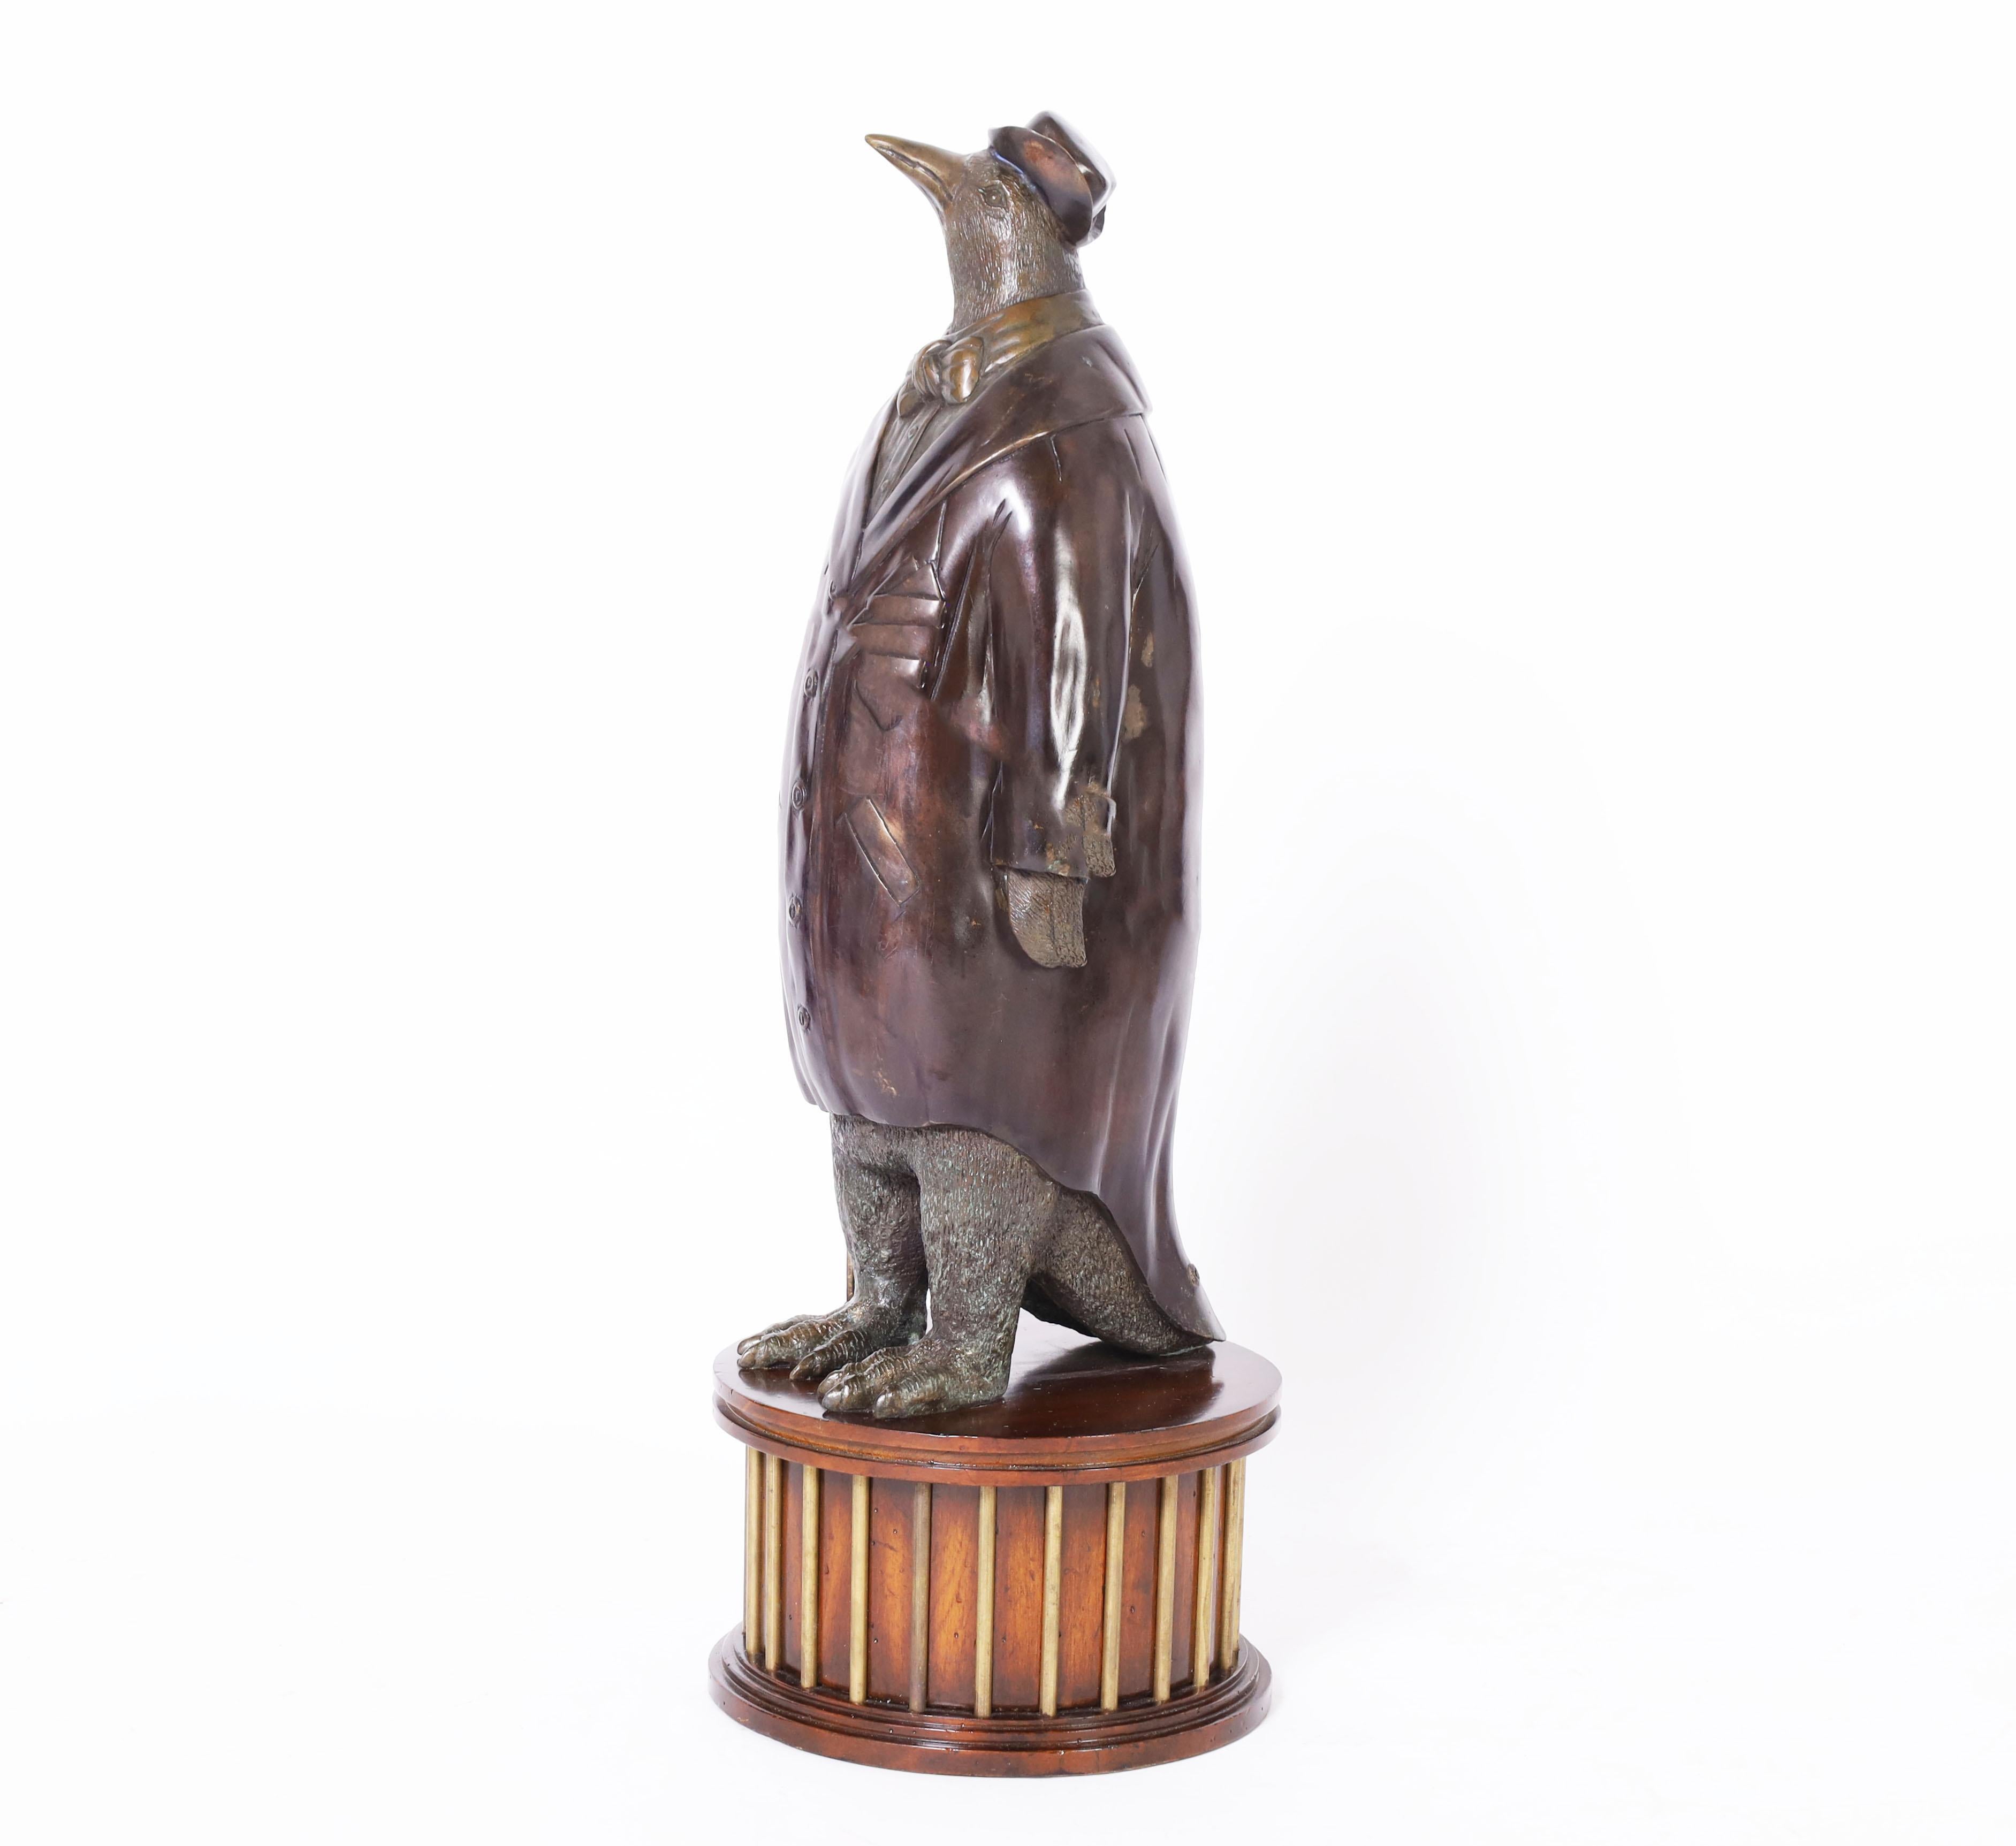 Striking mid century figural bronze sculpture of a penguin dressed in formal attire using three different patina techniques and presented on a mahogany and brass pedestal. Signed Maitland-Smith on the bottom.